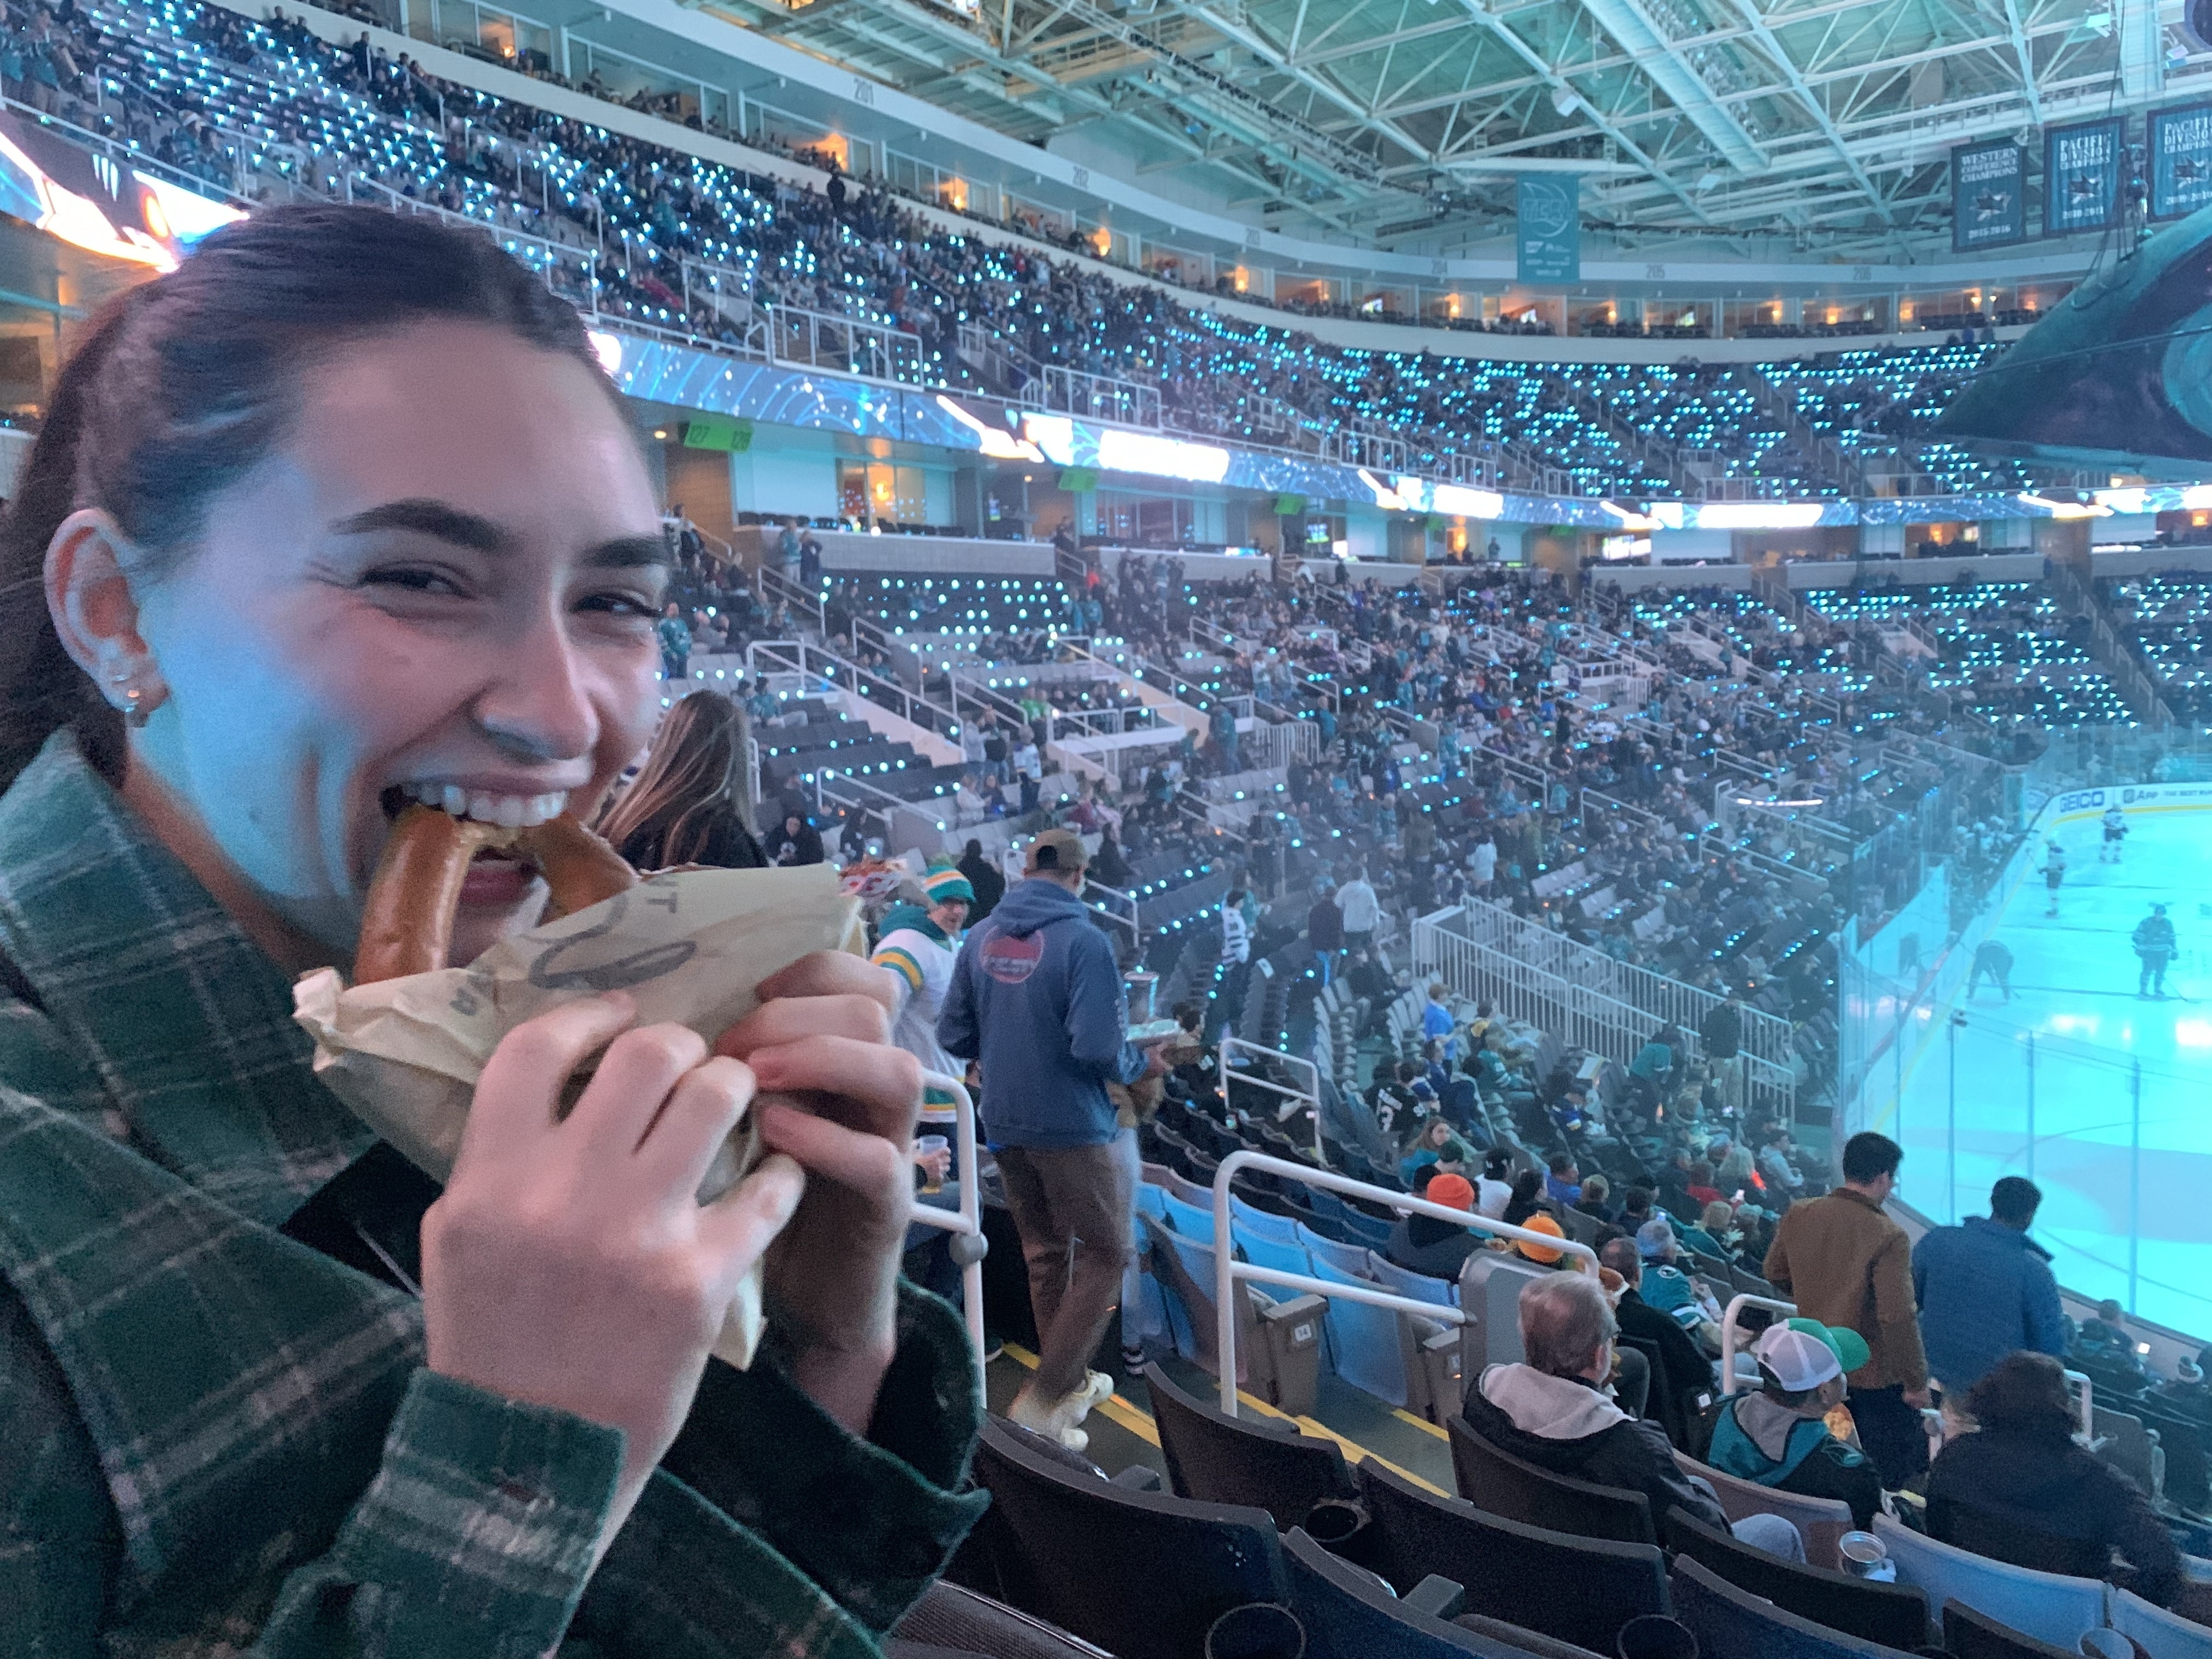 Section 206 at SAP Center 